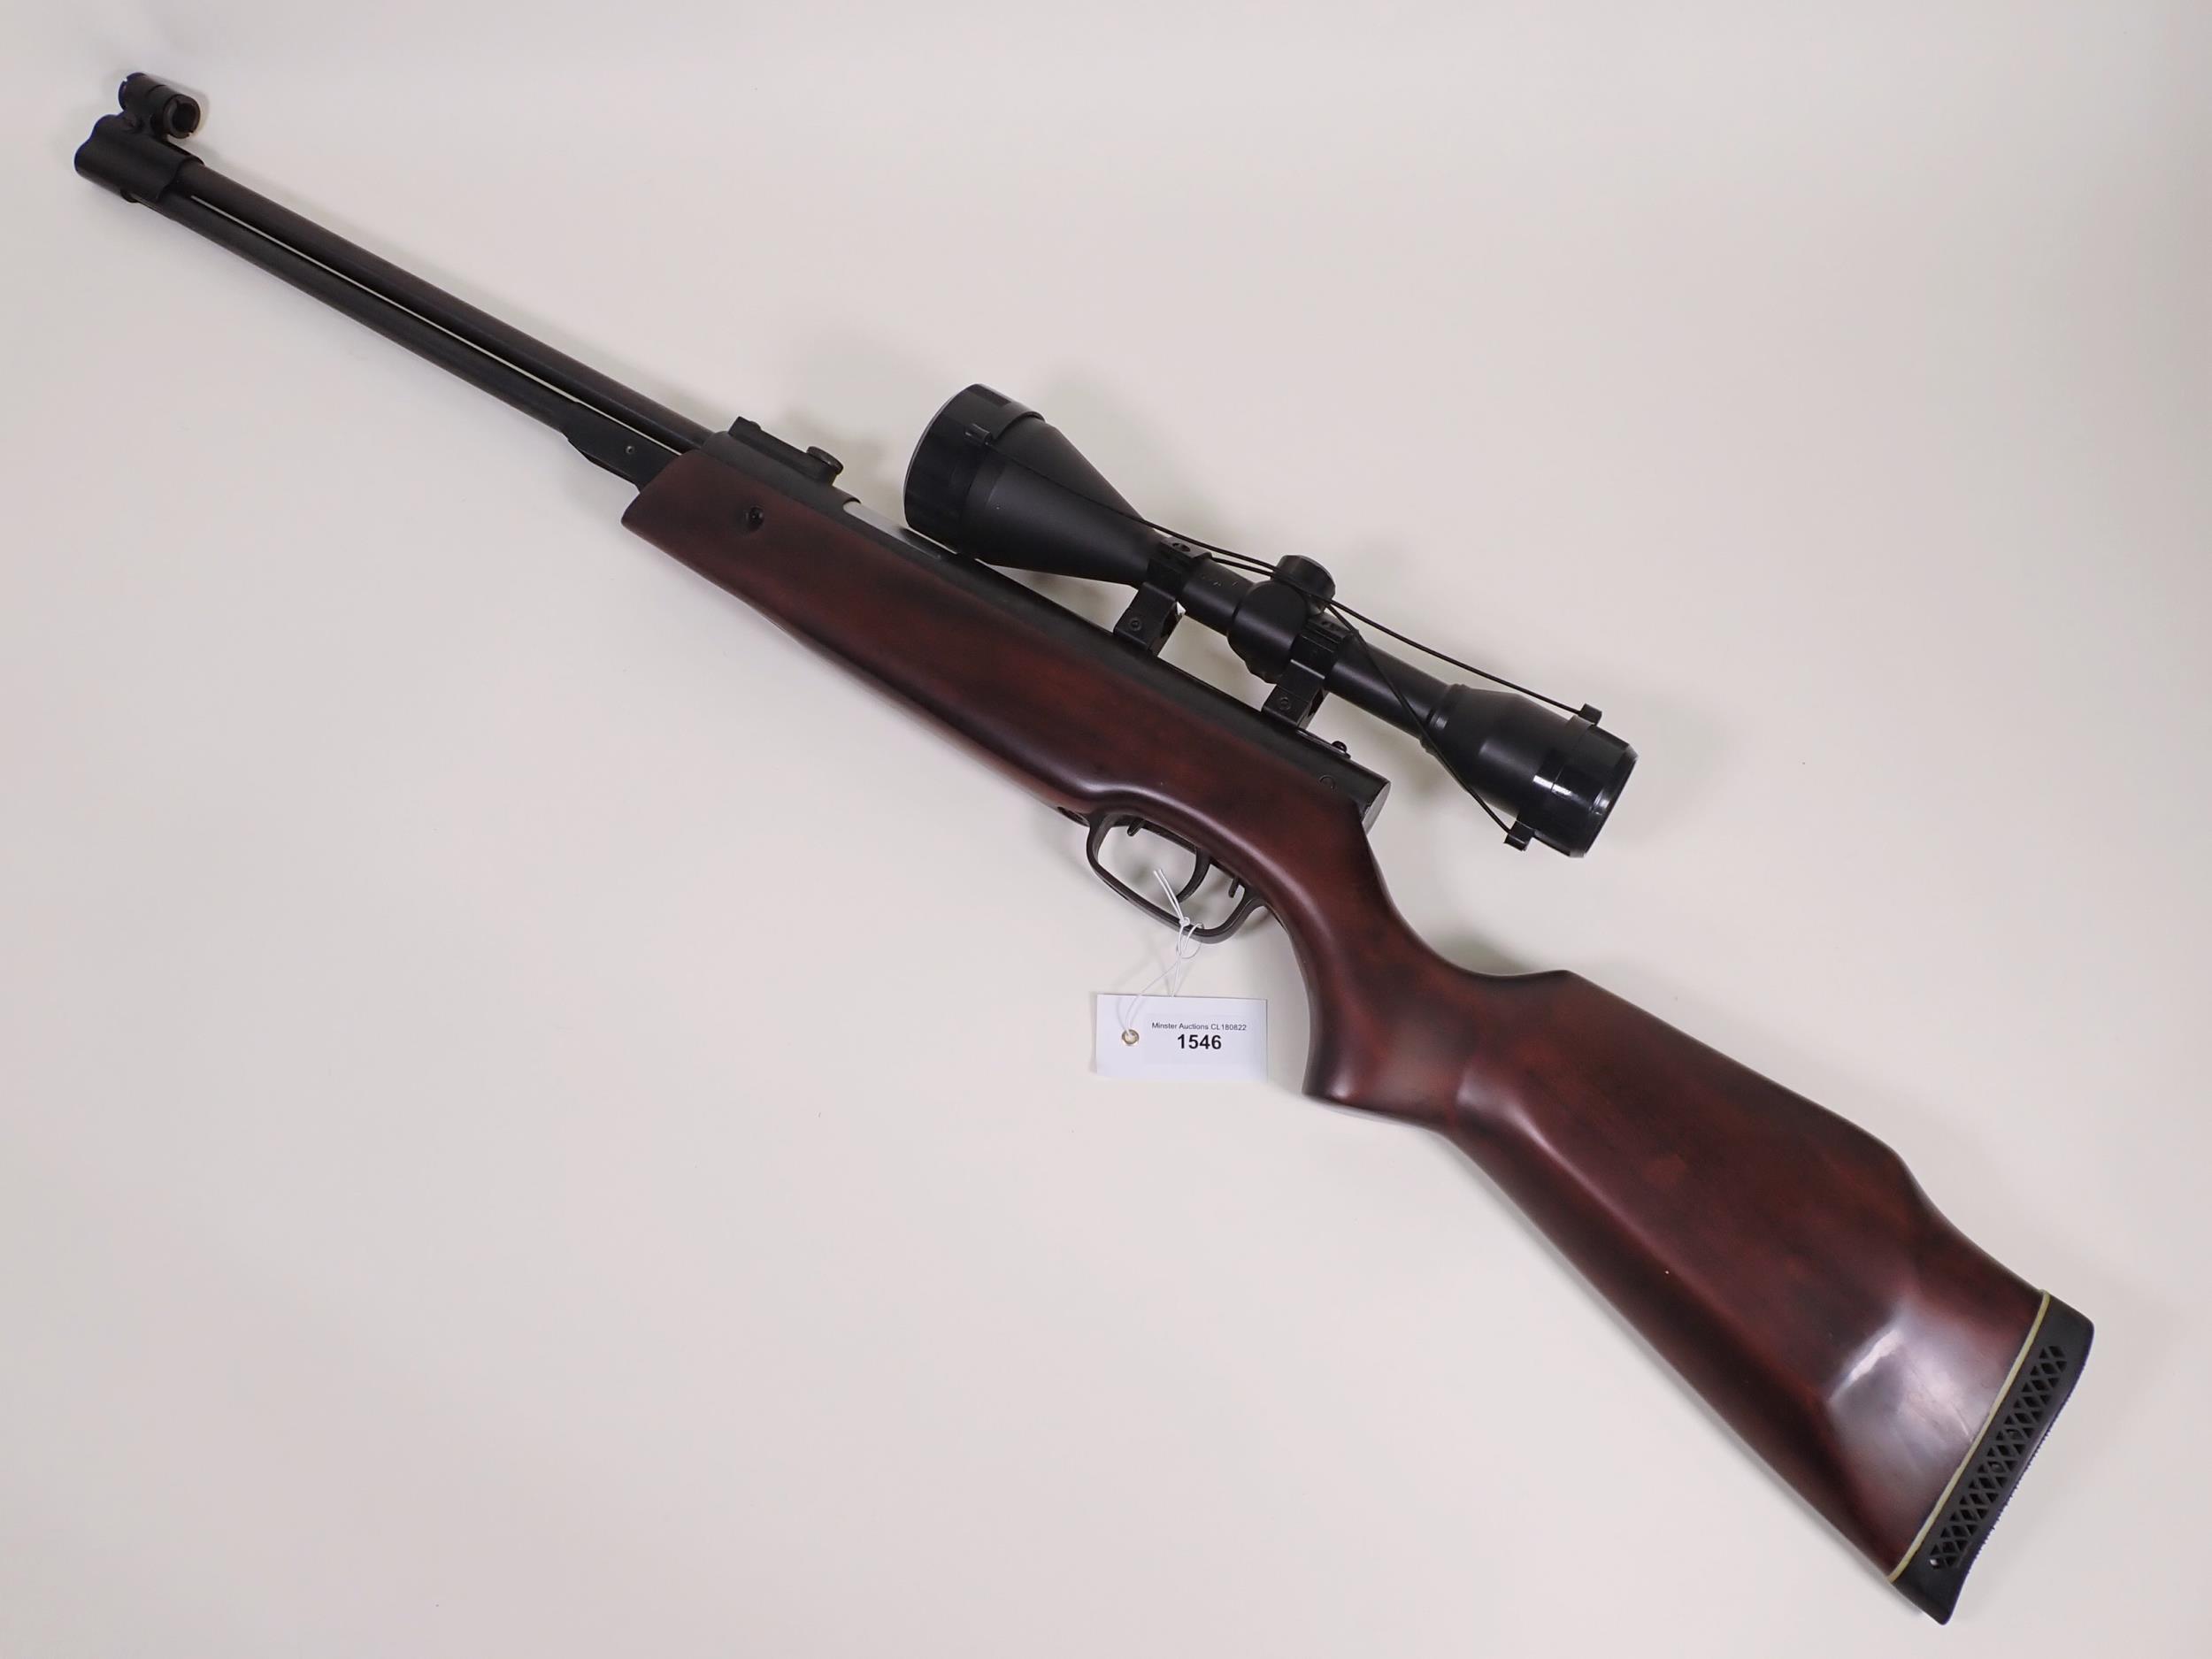 An SMK XS36-1 .22 Air Rifle with 8x56 telescopic sight and case